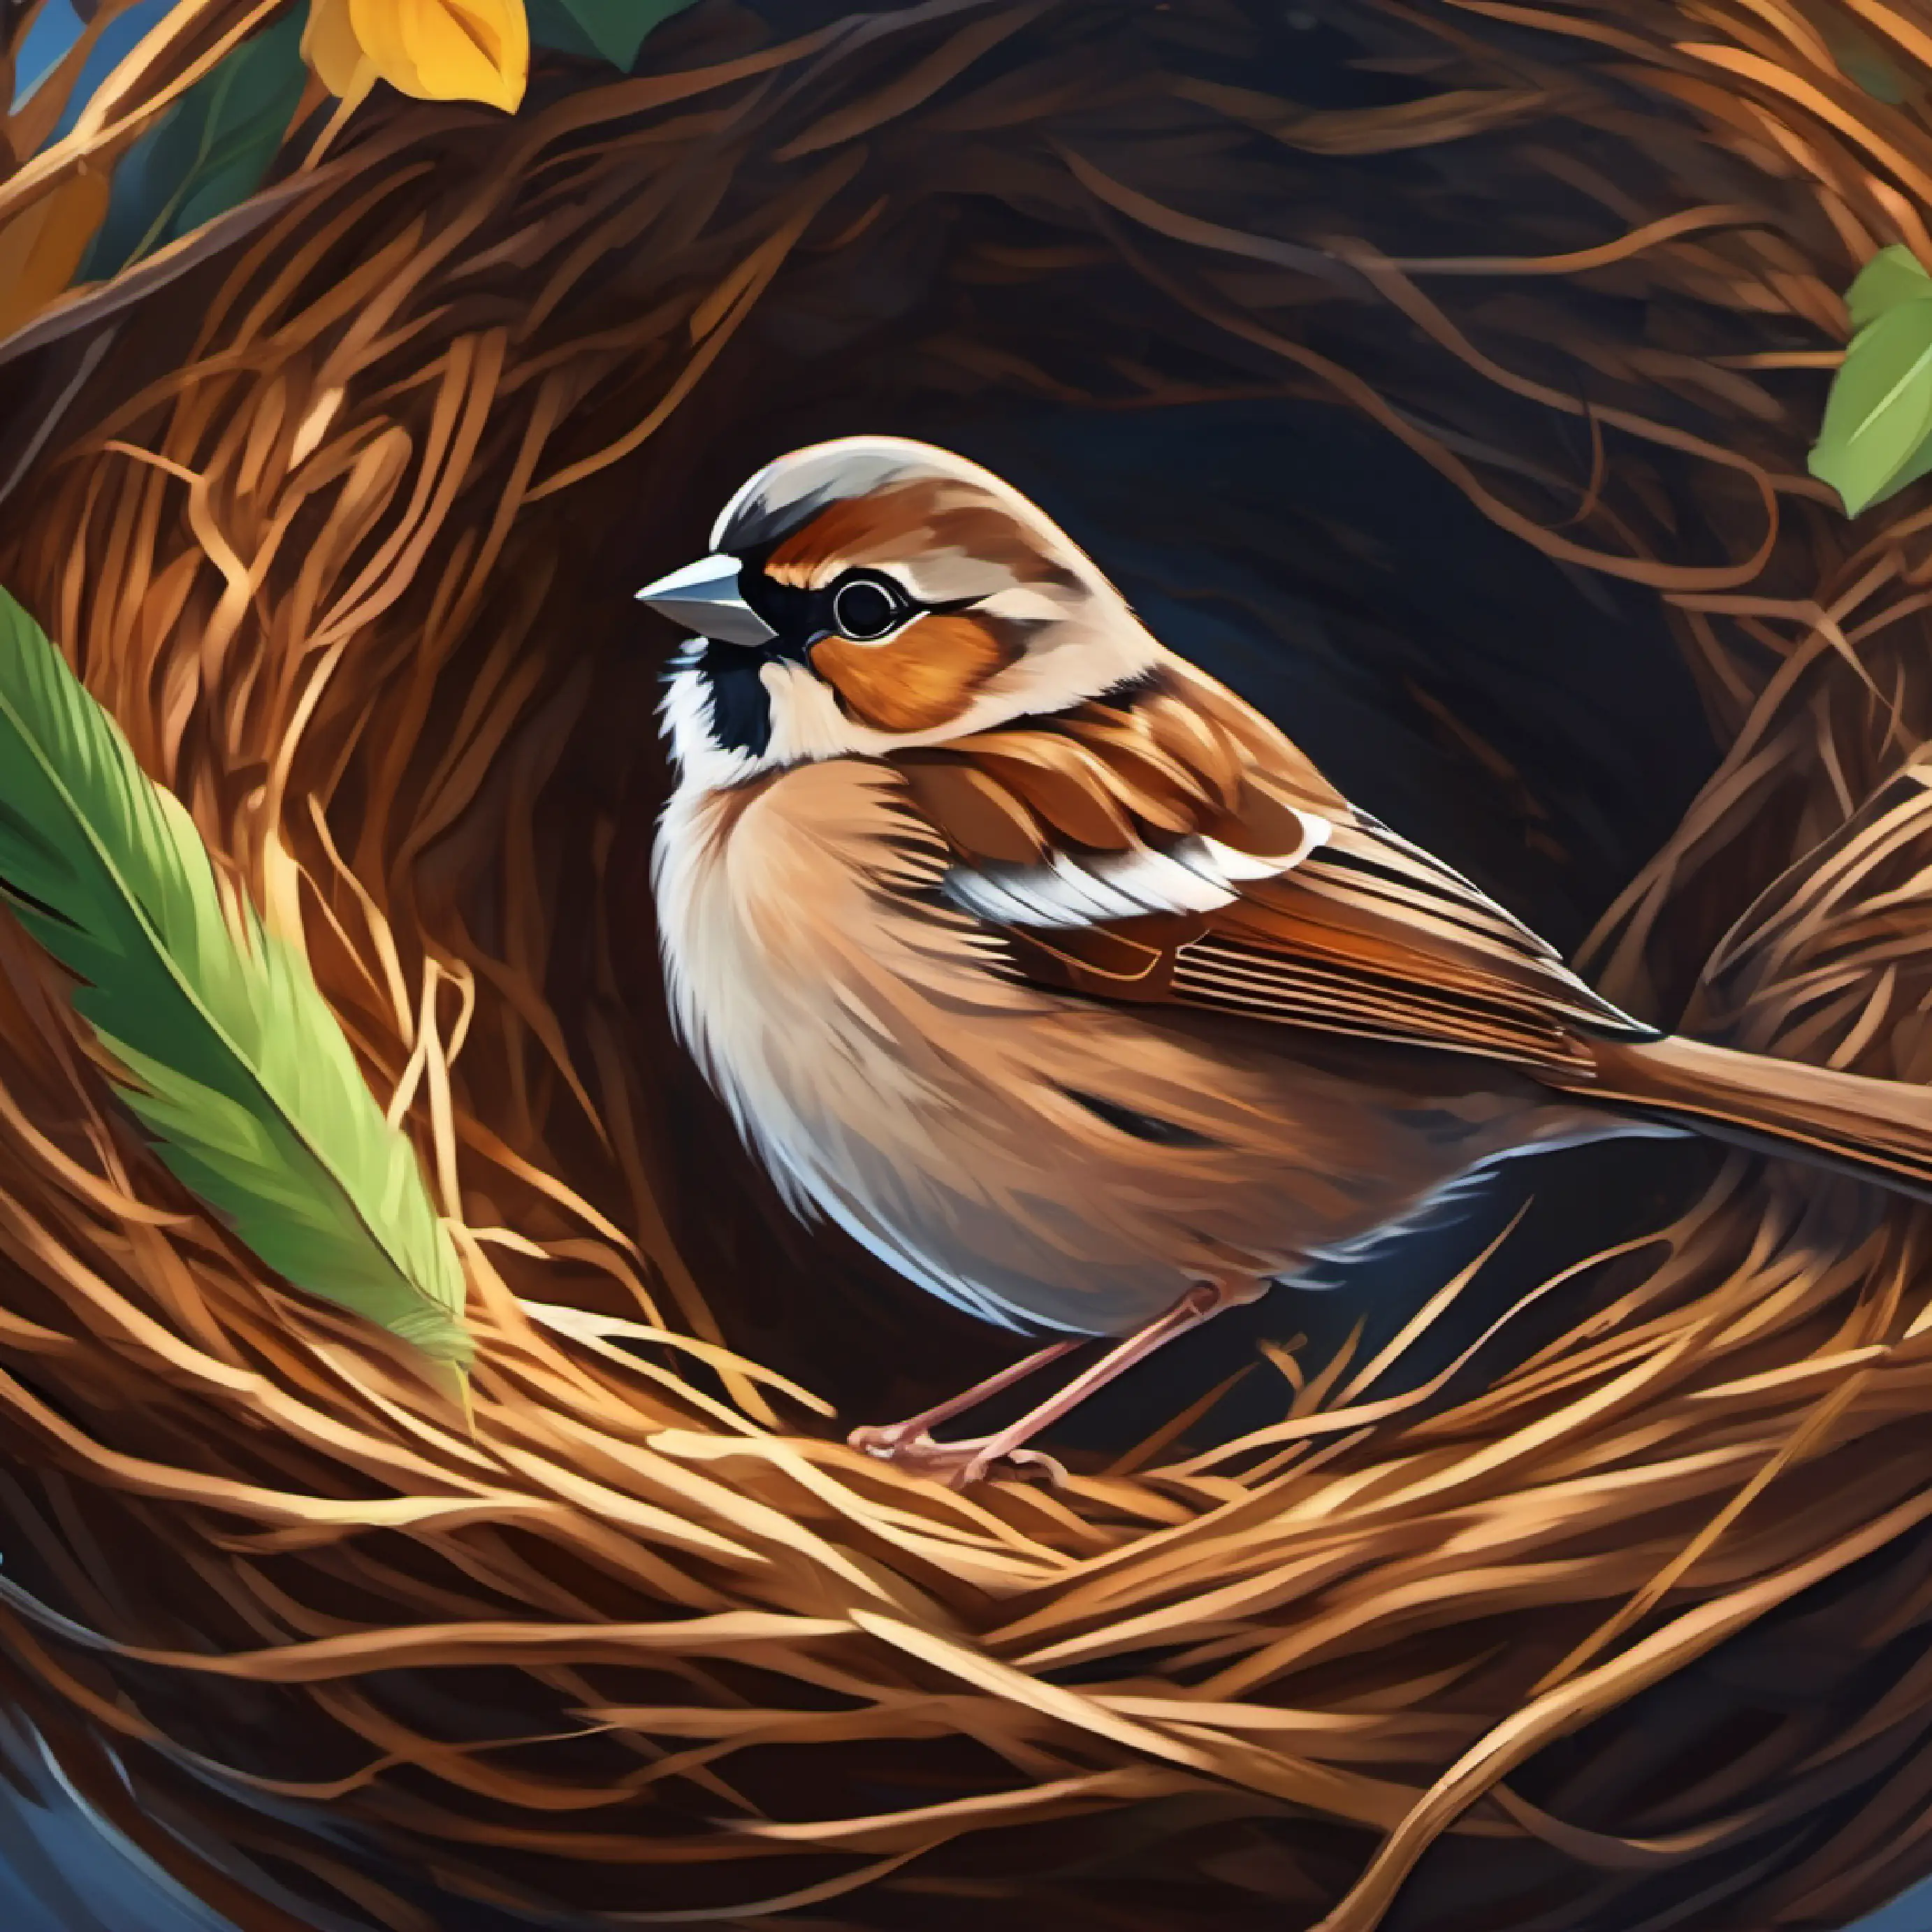 Small sparrow, brown feathers, bright eyes makes room in her nest